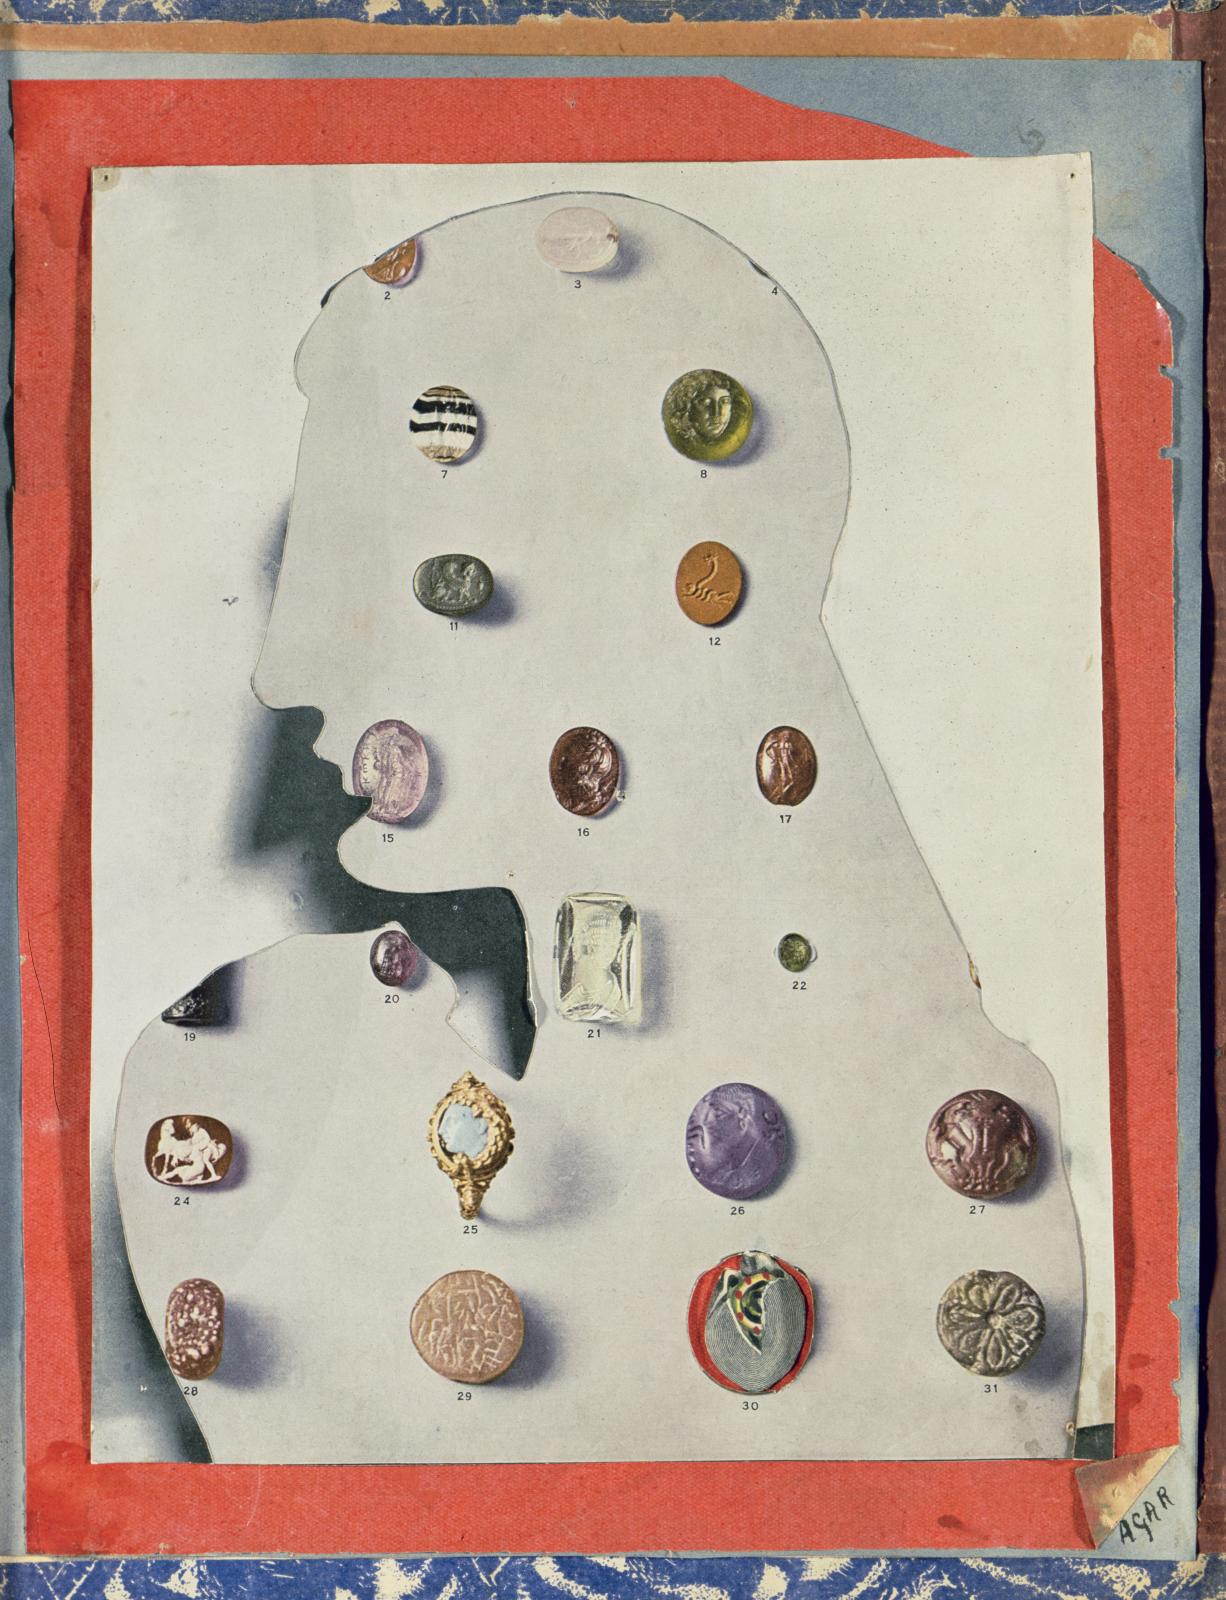 Eileen Agar, Precious Stones, 1936, Collage on paper, 26 x 20.9 cm (10.2 x 8.2in),Courtesy of Leeds Museums and Galleries, ©Estate of Eile